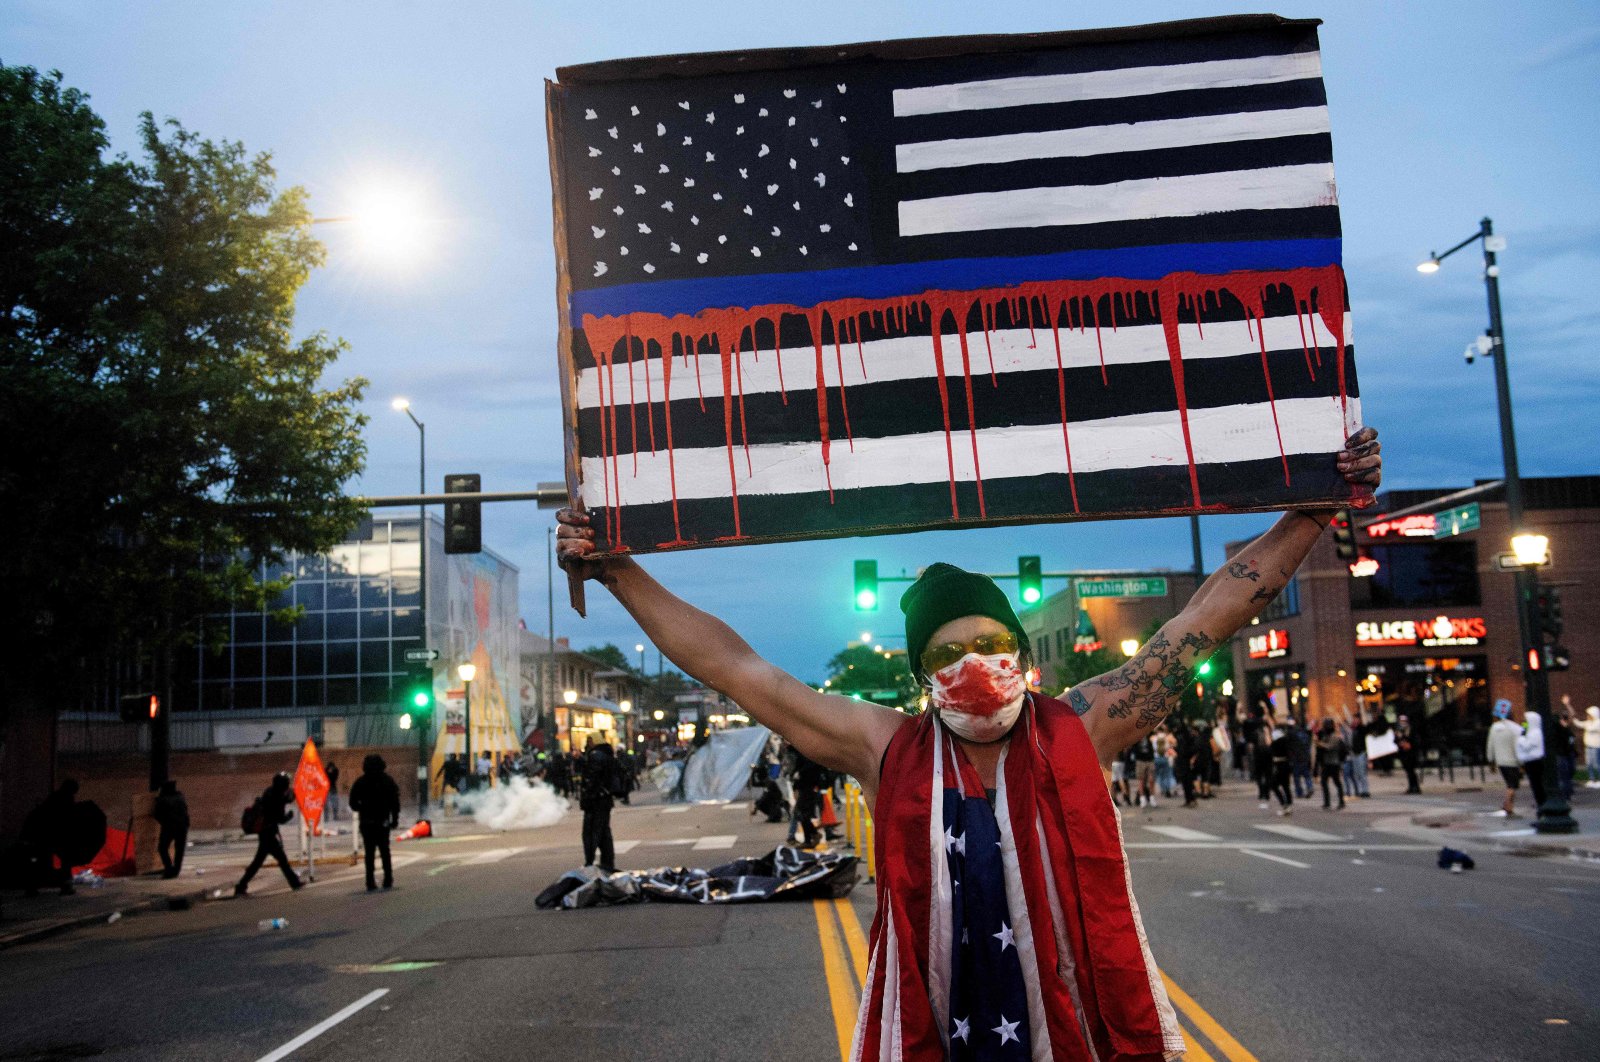 A demonstrator holds up a sign during a protest, Denver, May 31, 2020. (AFP Photo)